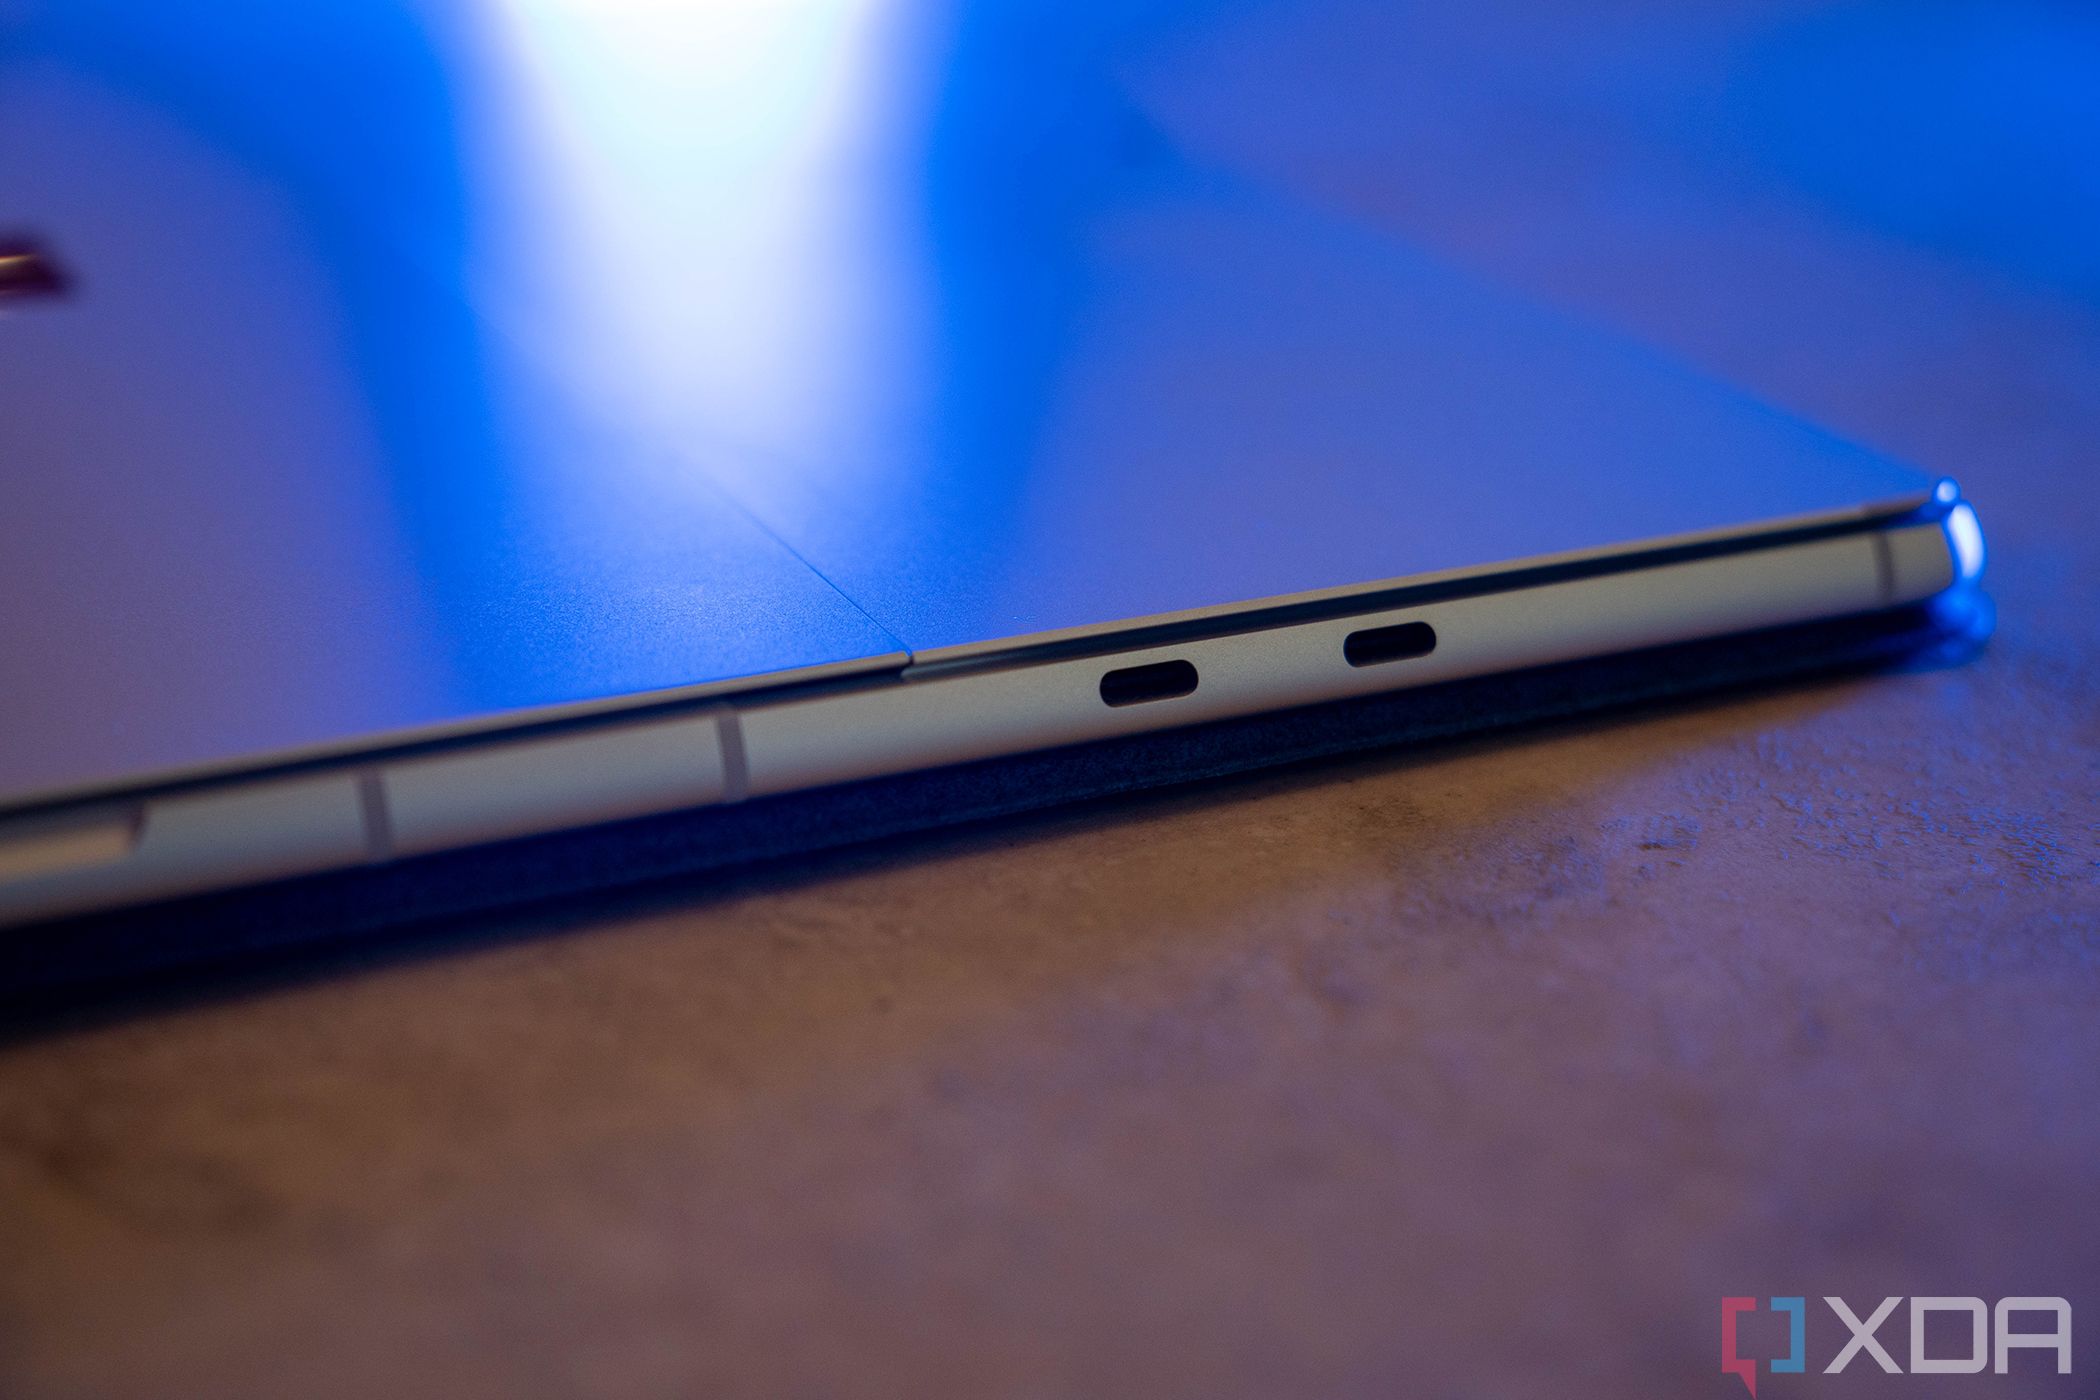 Dual USB Type-C ports on the side of a silver tablet with blue lighting